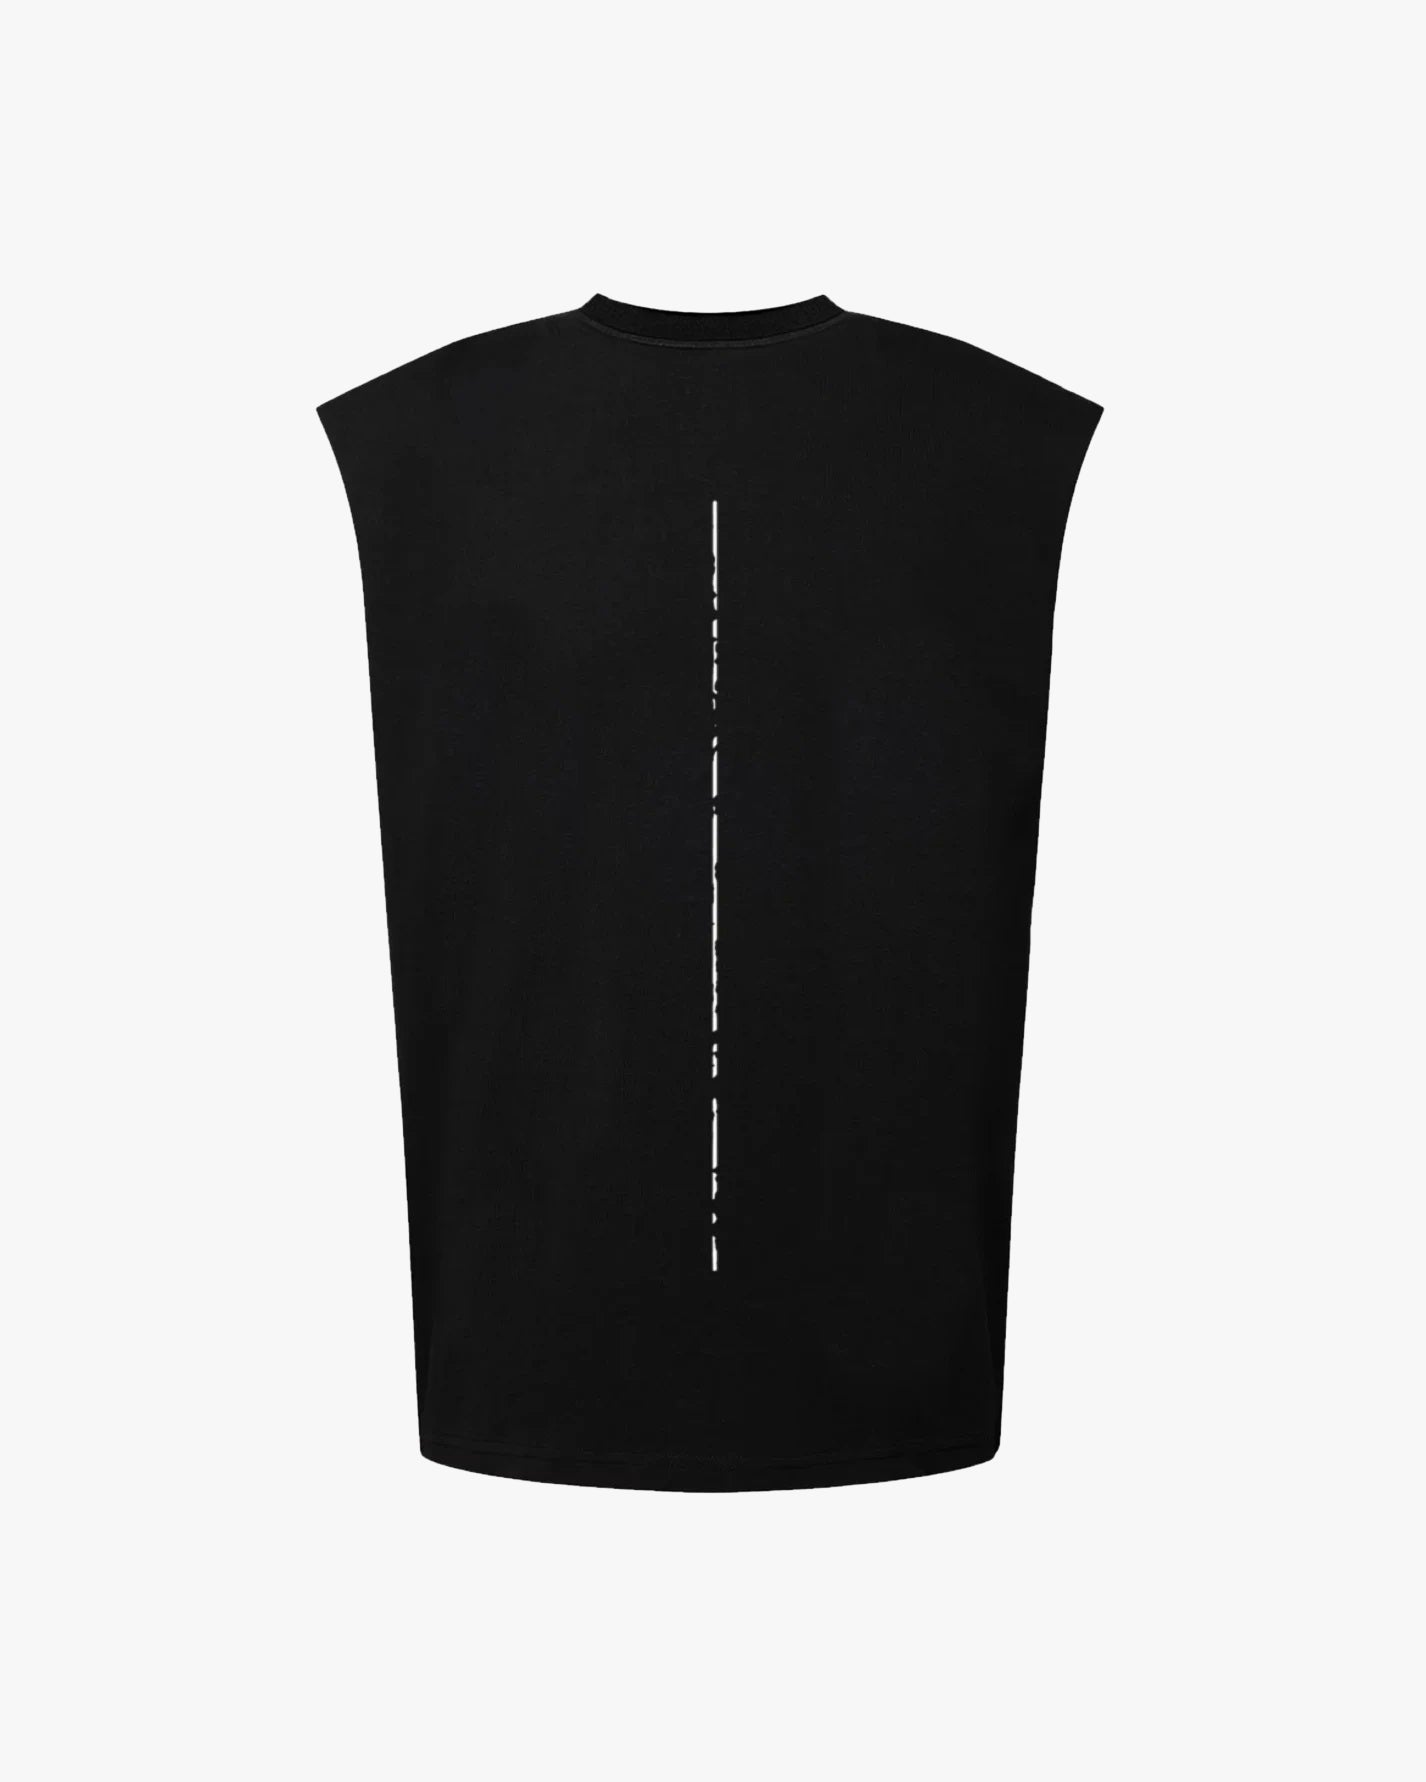 UNITY AND STRIVE TANK TOP - BLACK